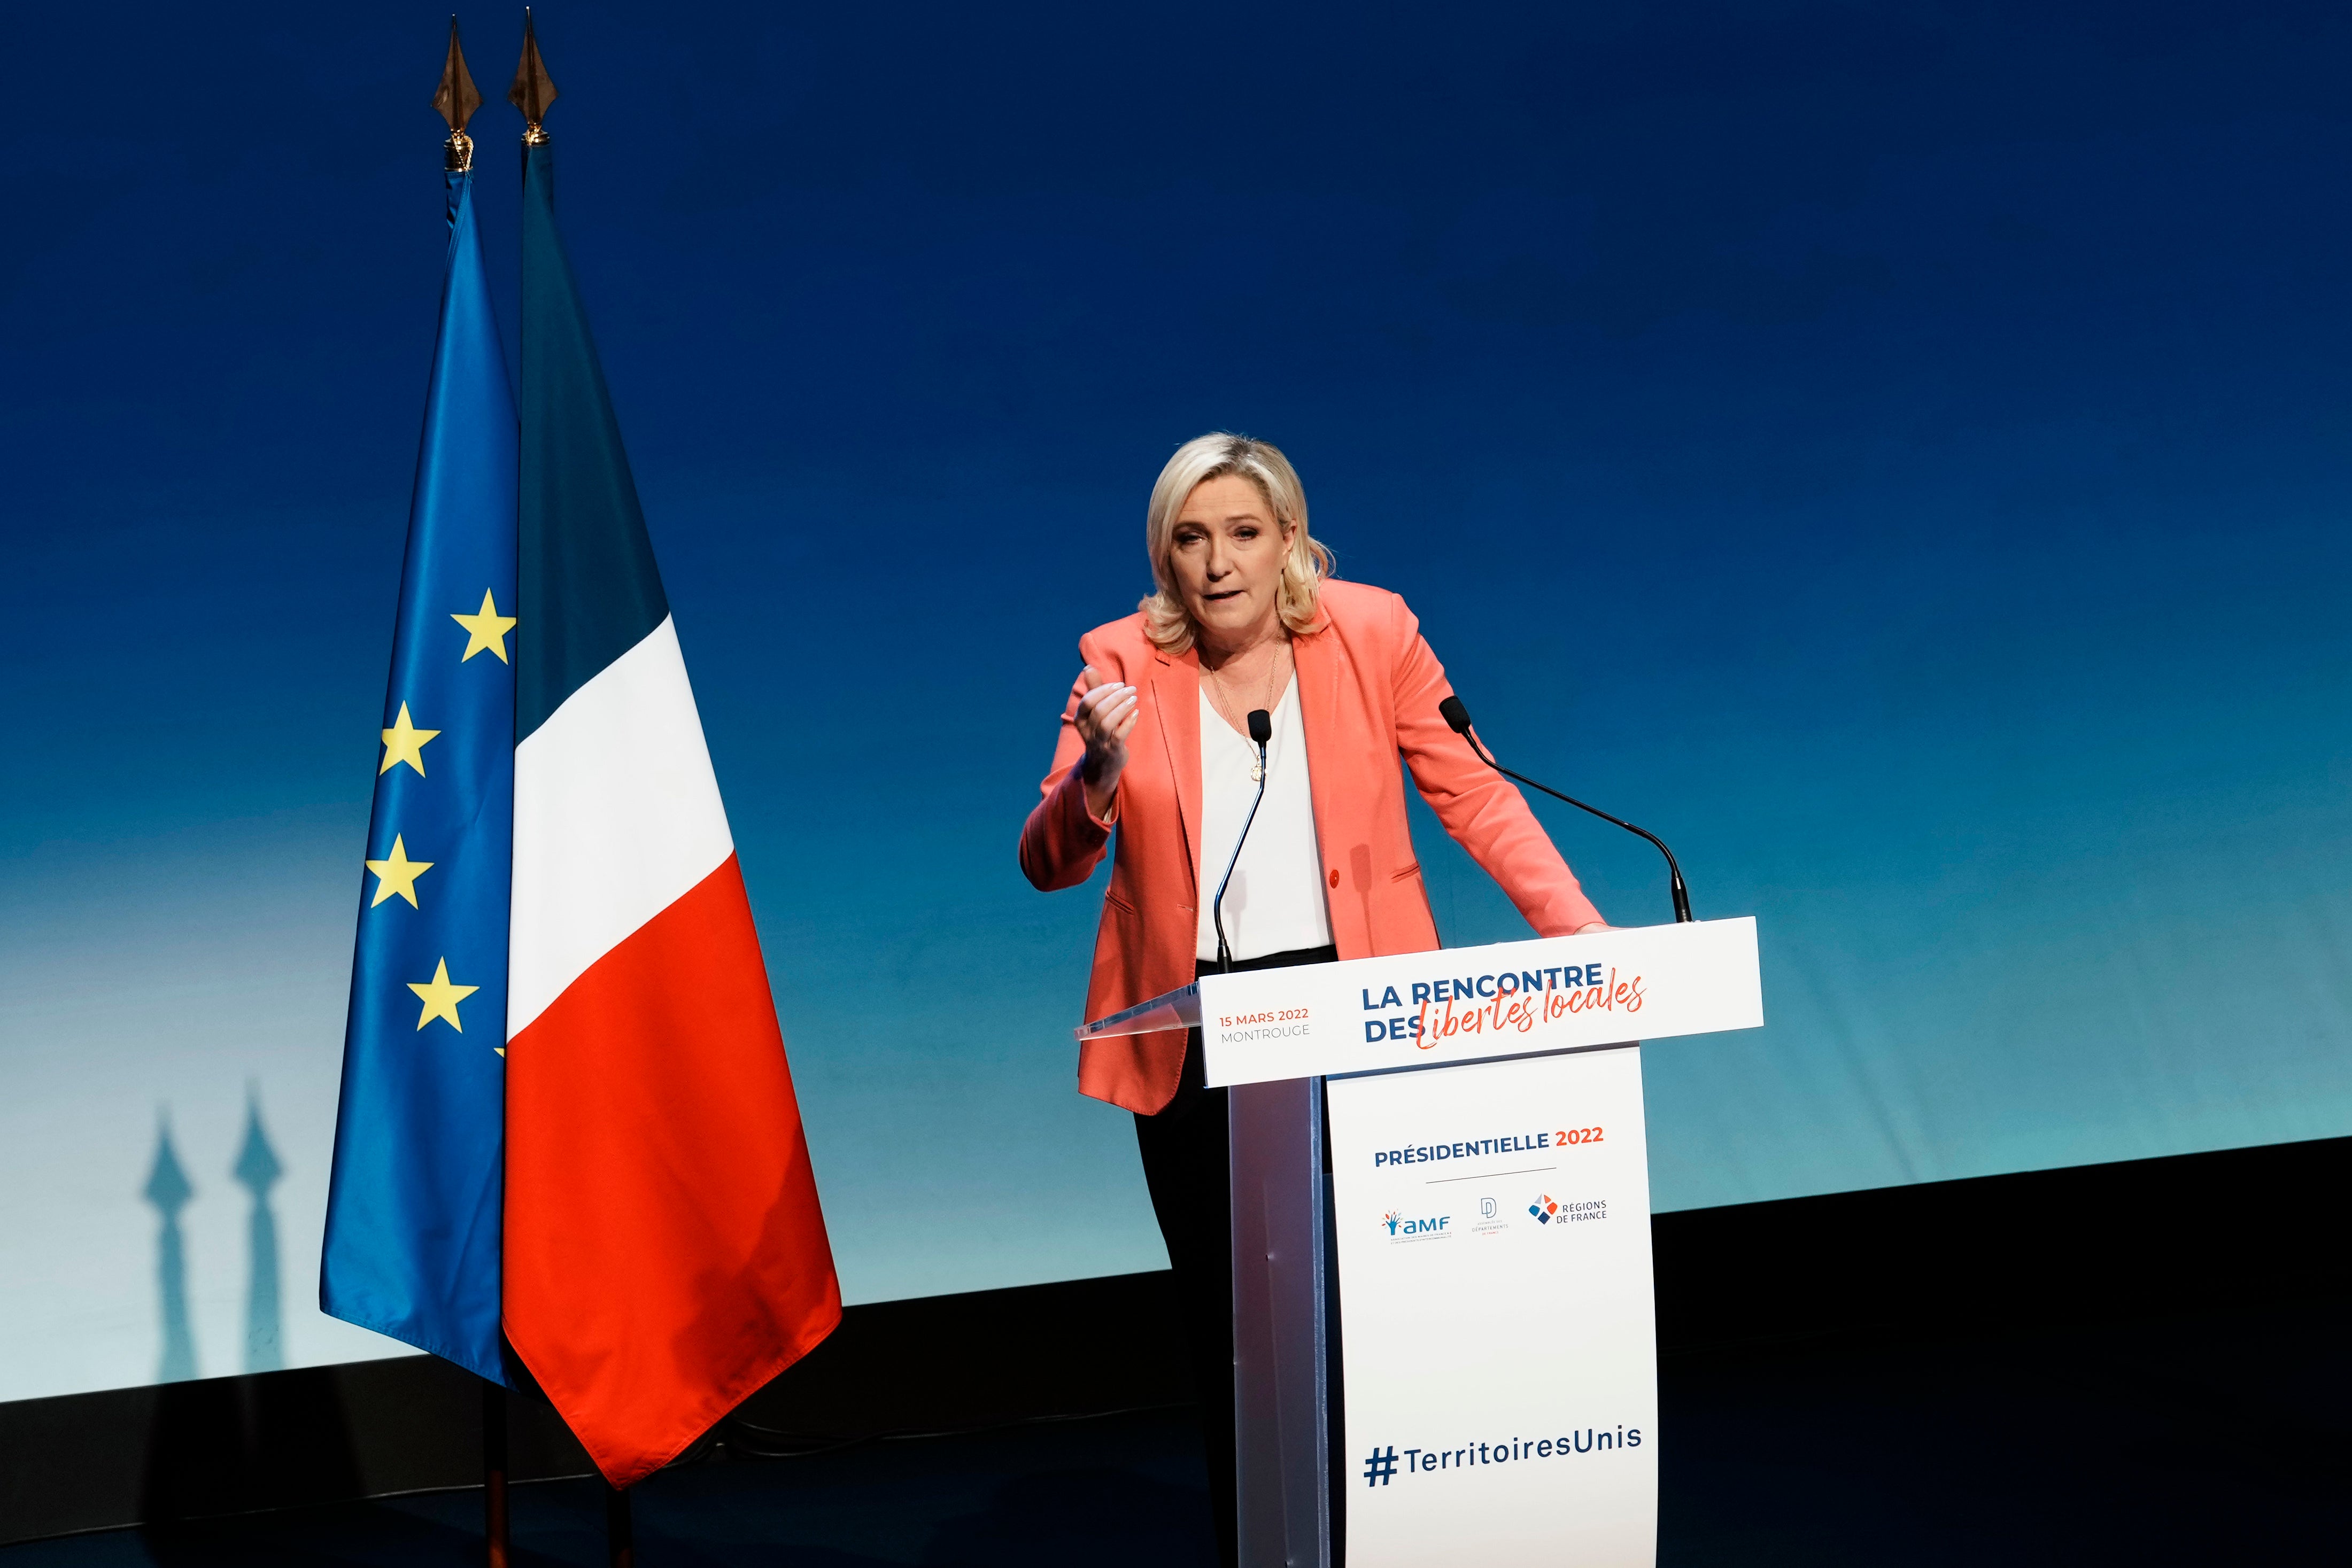 Marine Le Pen is now only a few points behind Macron in the polls